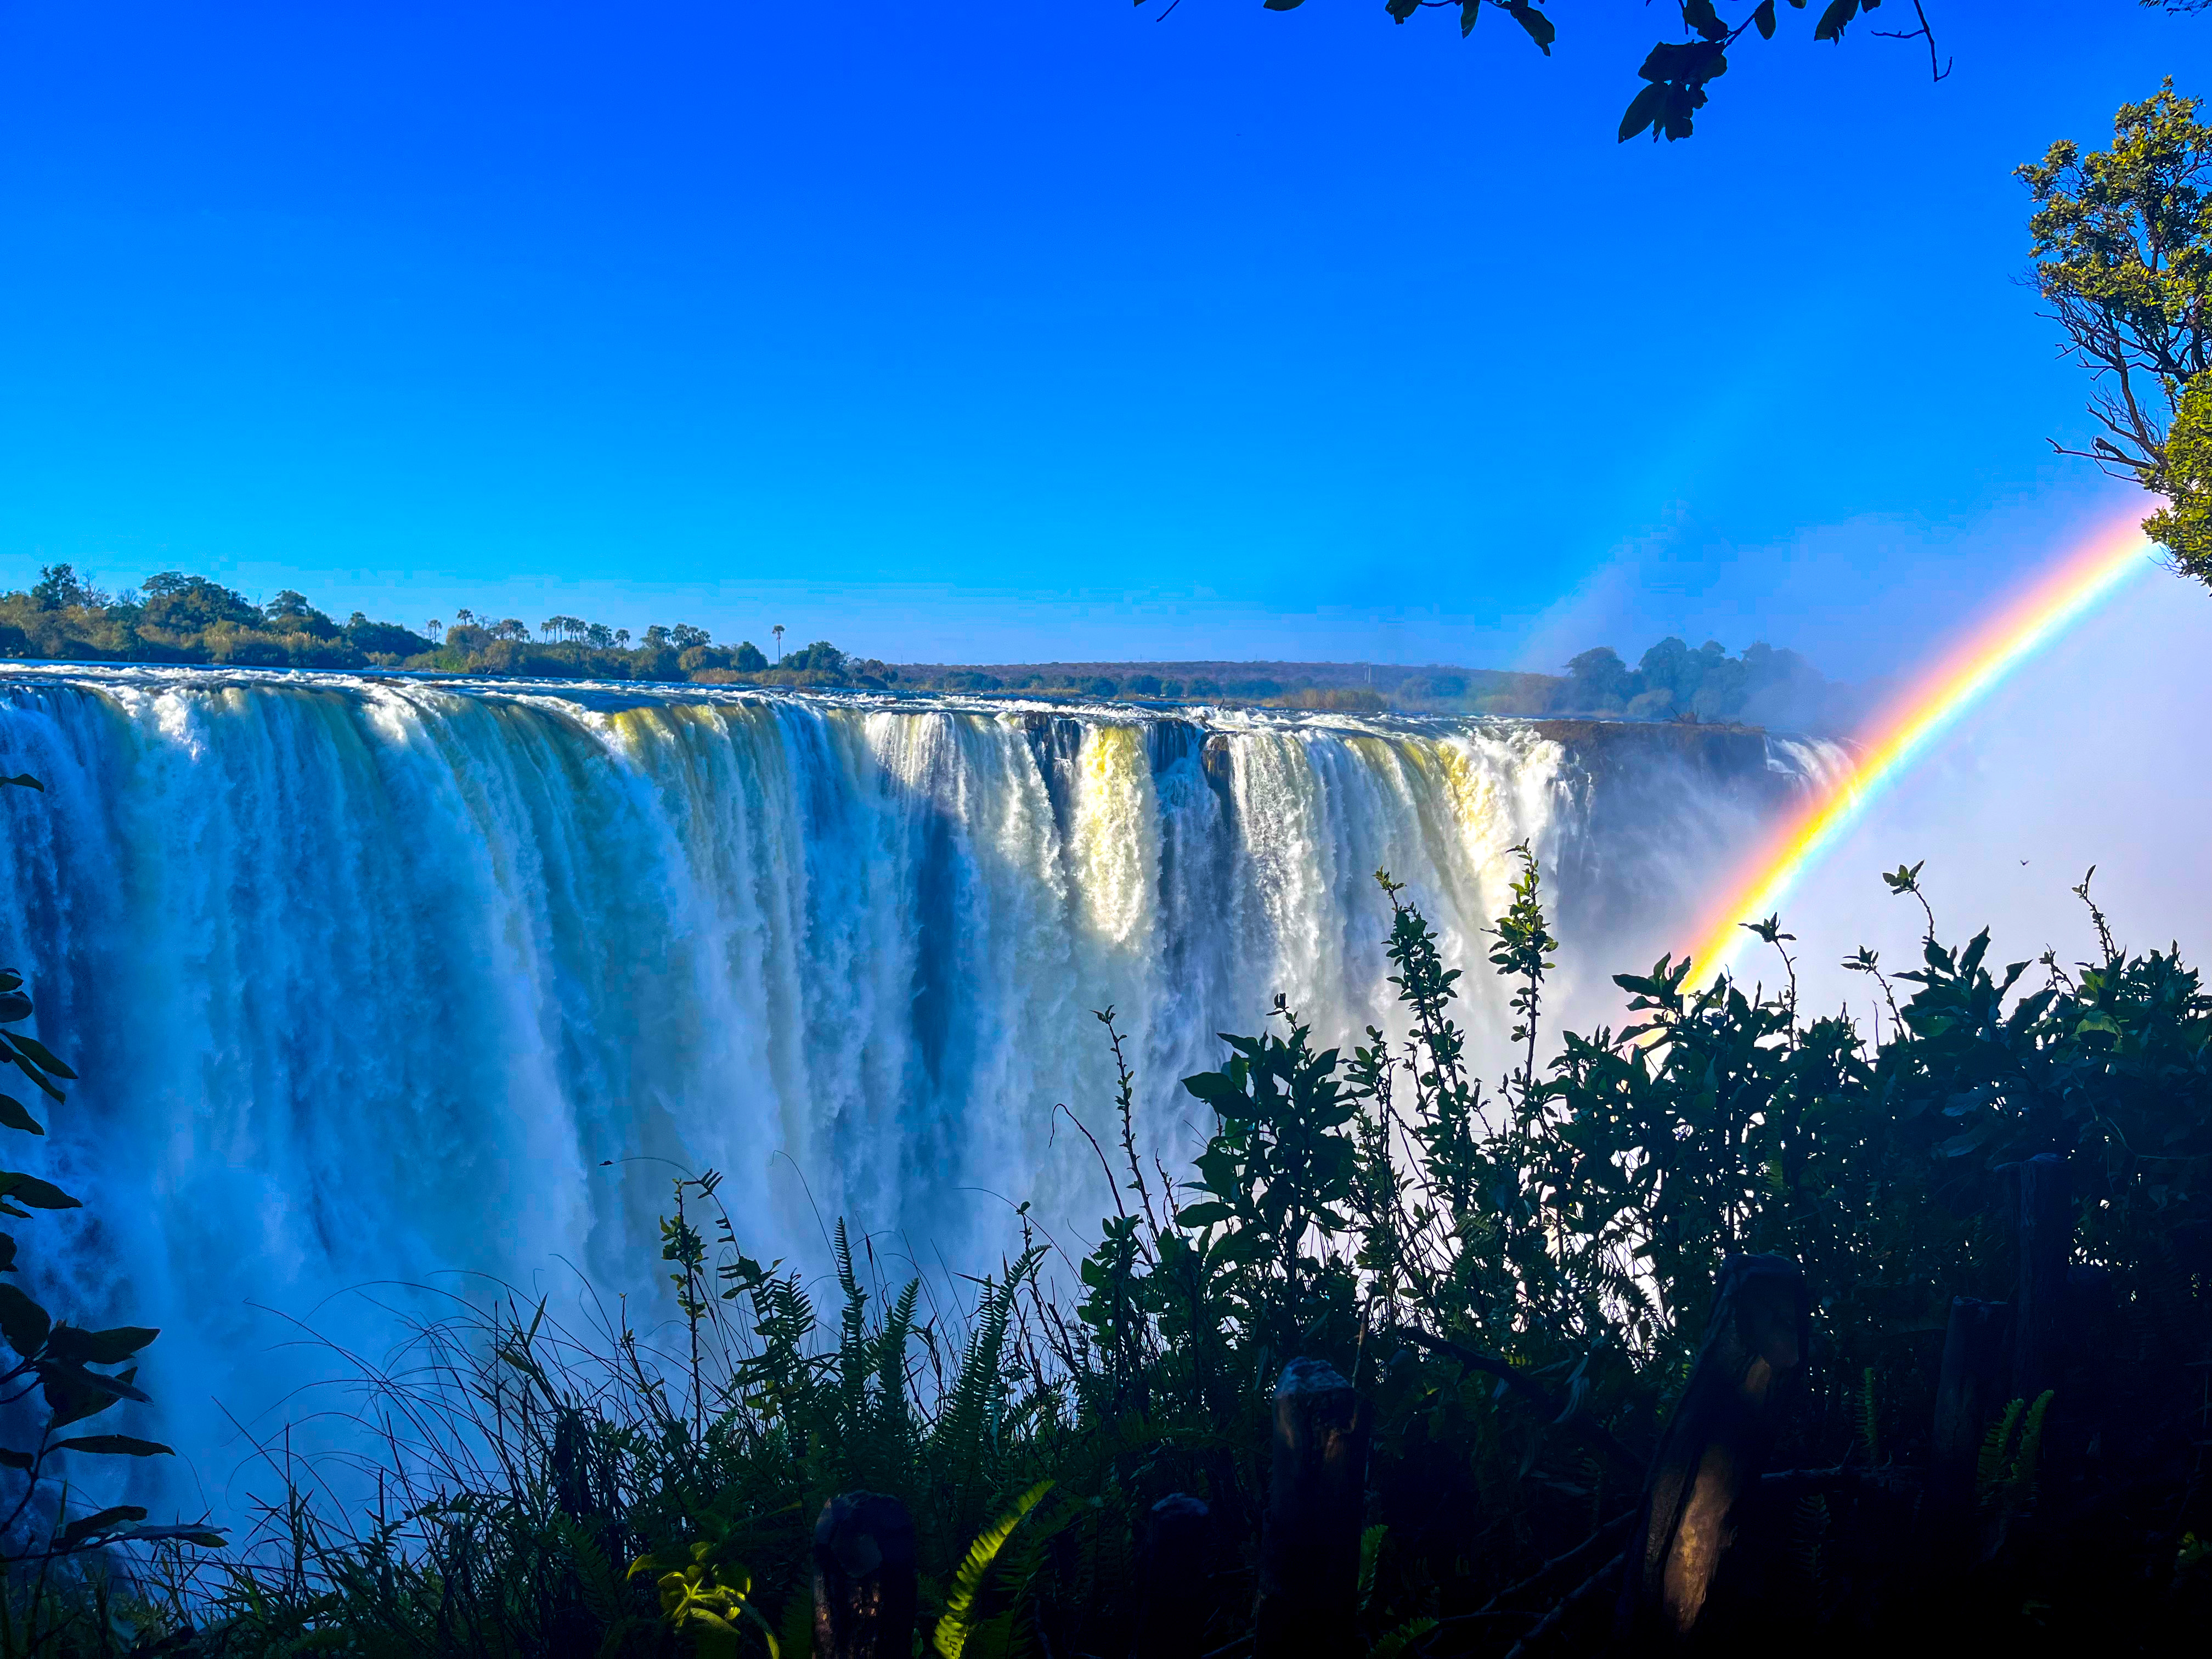 Victoria Falls, a UNESCO World Heritage Site, is one of the largest waterfalls in the world.